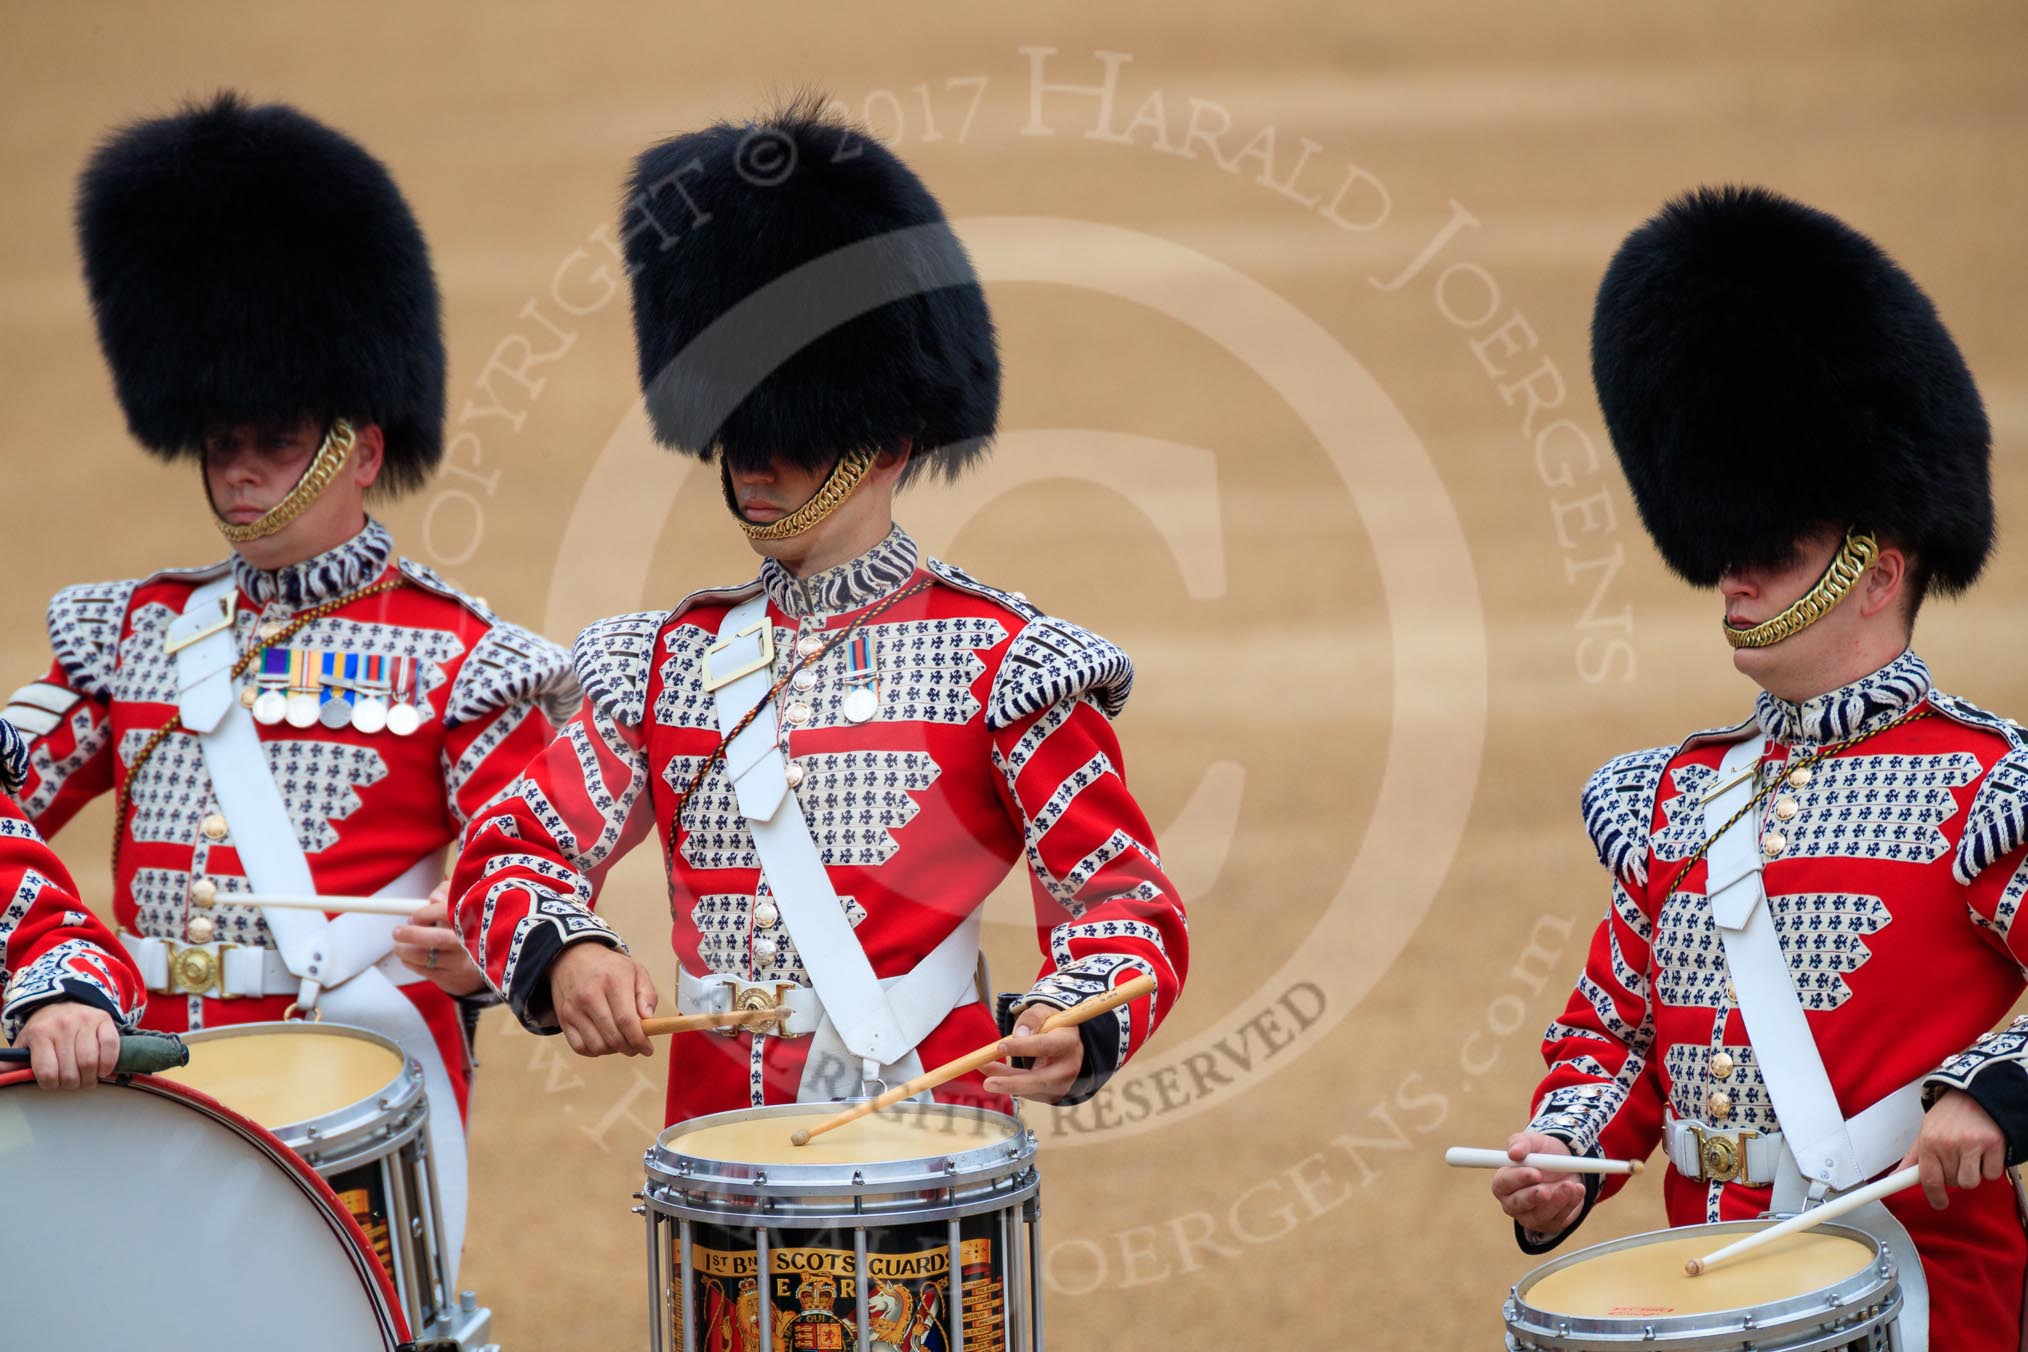 during The Colonel's Review {iptcyear4} (final rehearsal for Trooping the Colour, The Queen's Birthday Parade)  at Horse Guards Parade, Westminster, London, 2 June 2018, 10:18.